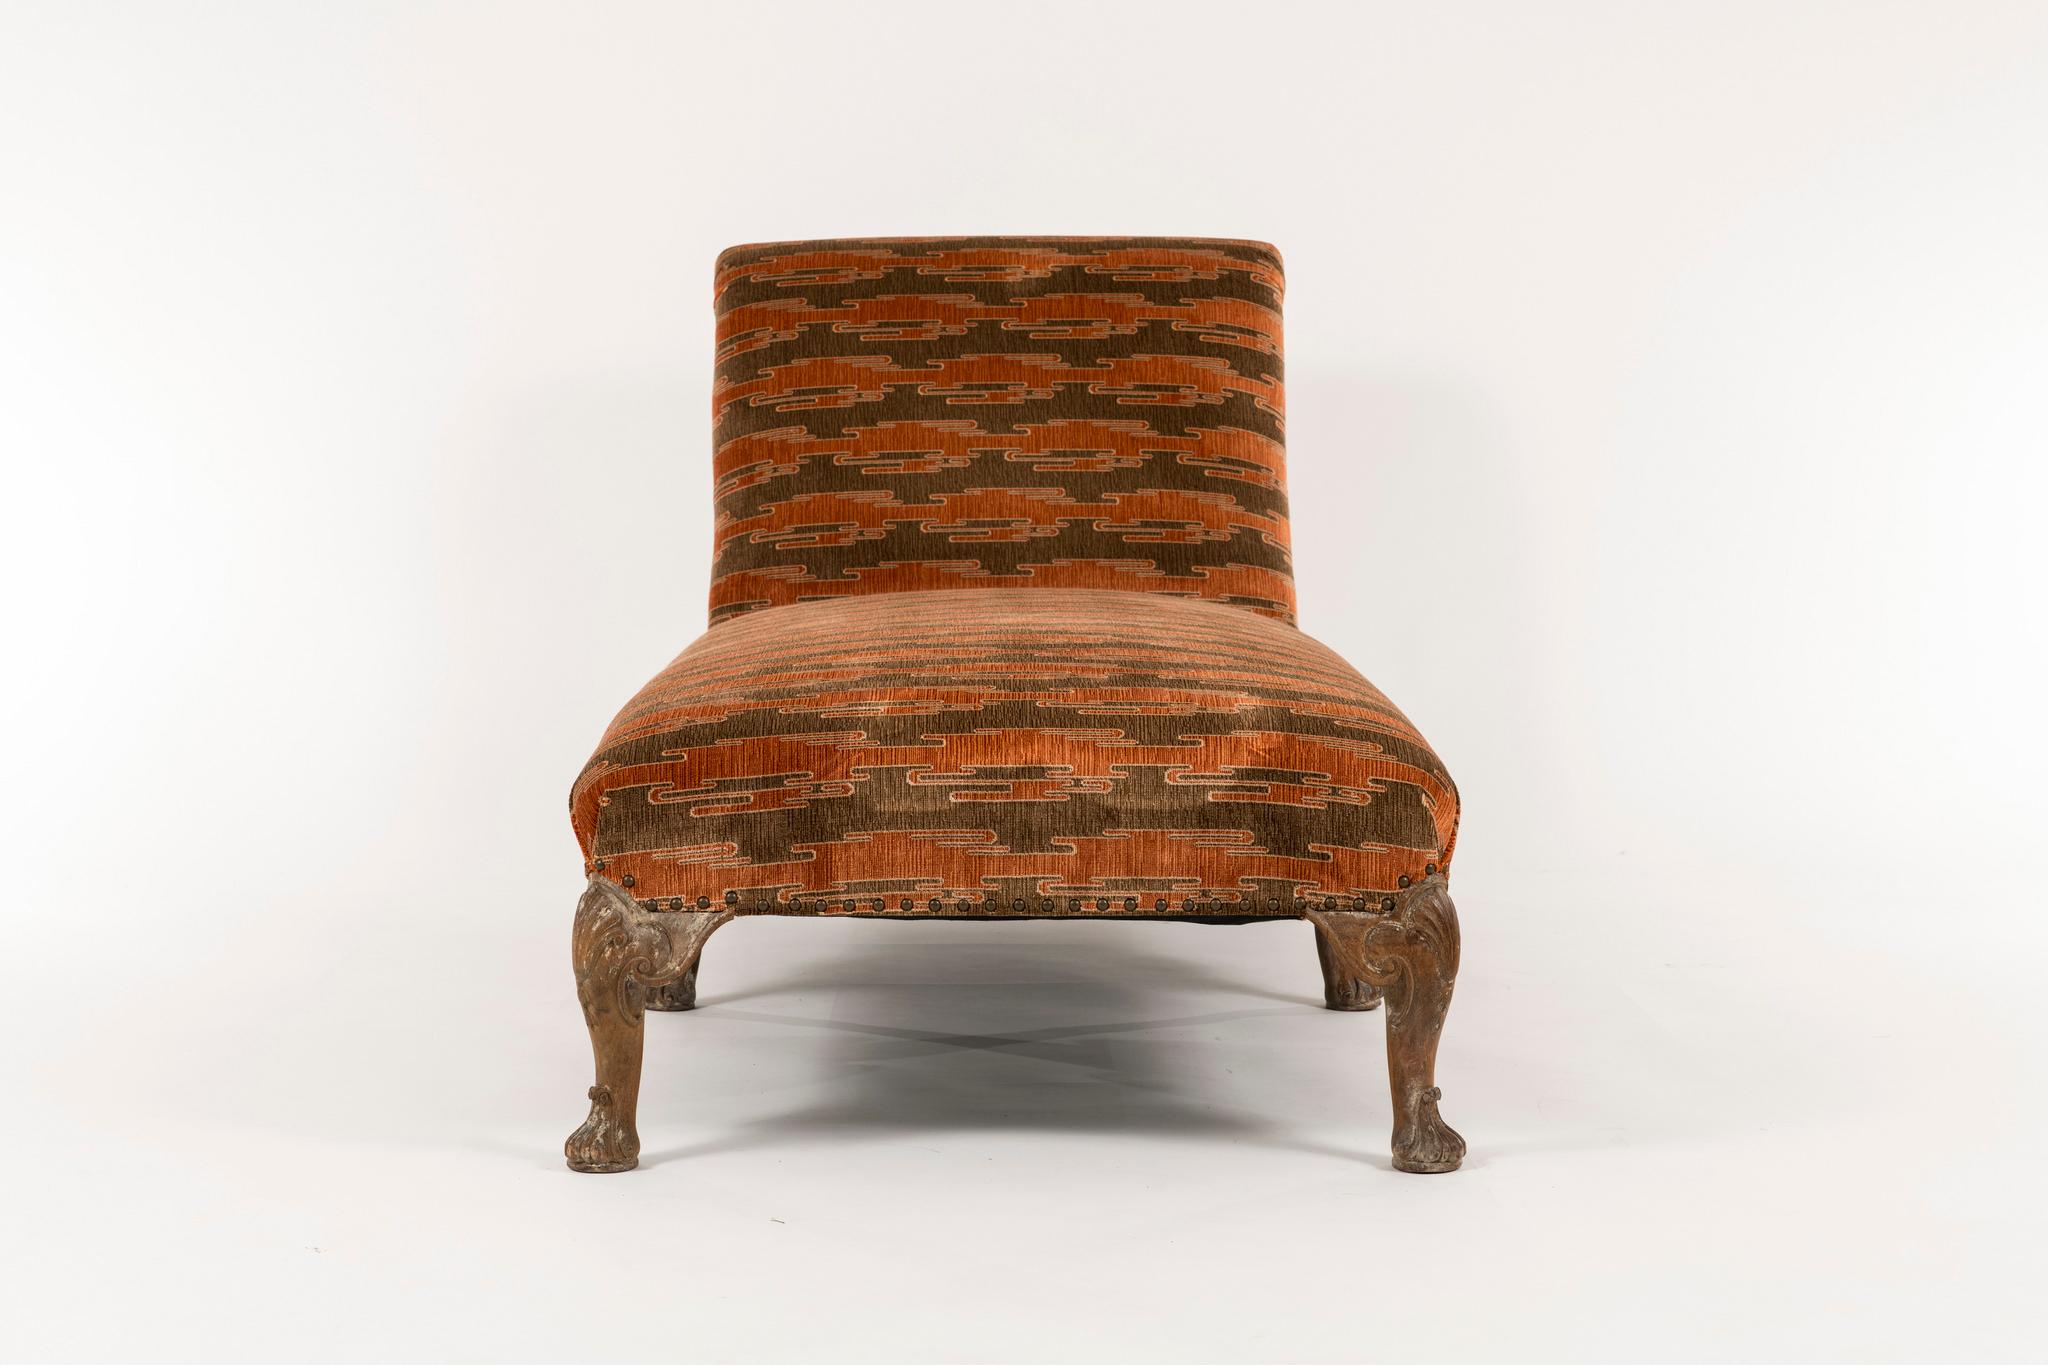 Carved Early 20th Century Regency Style Chaise